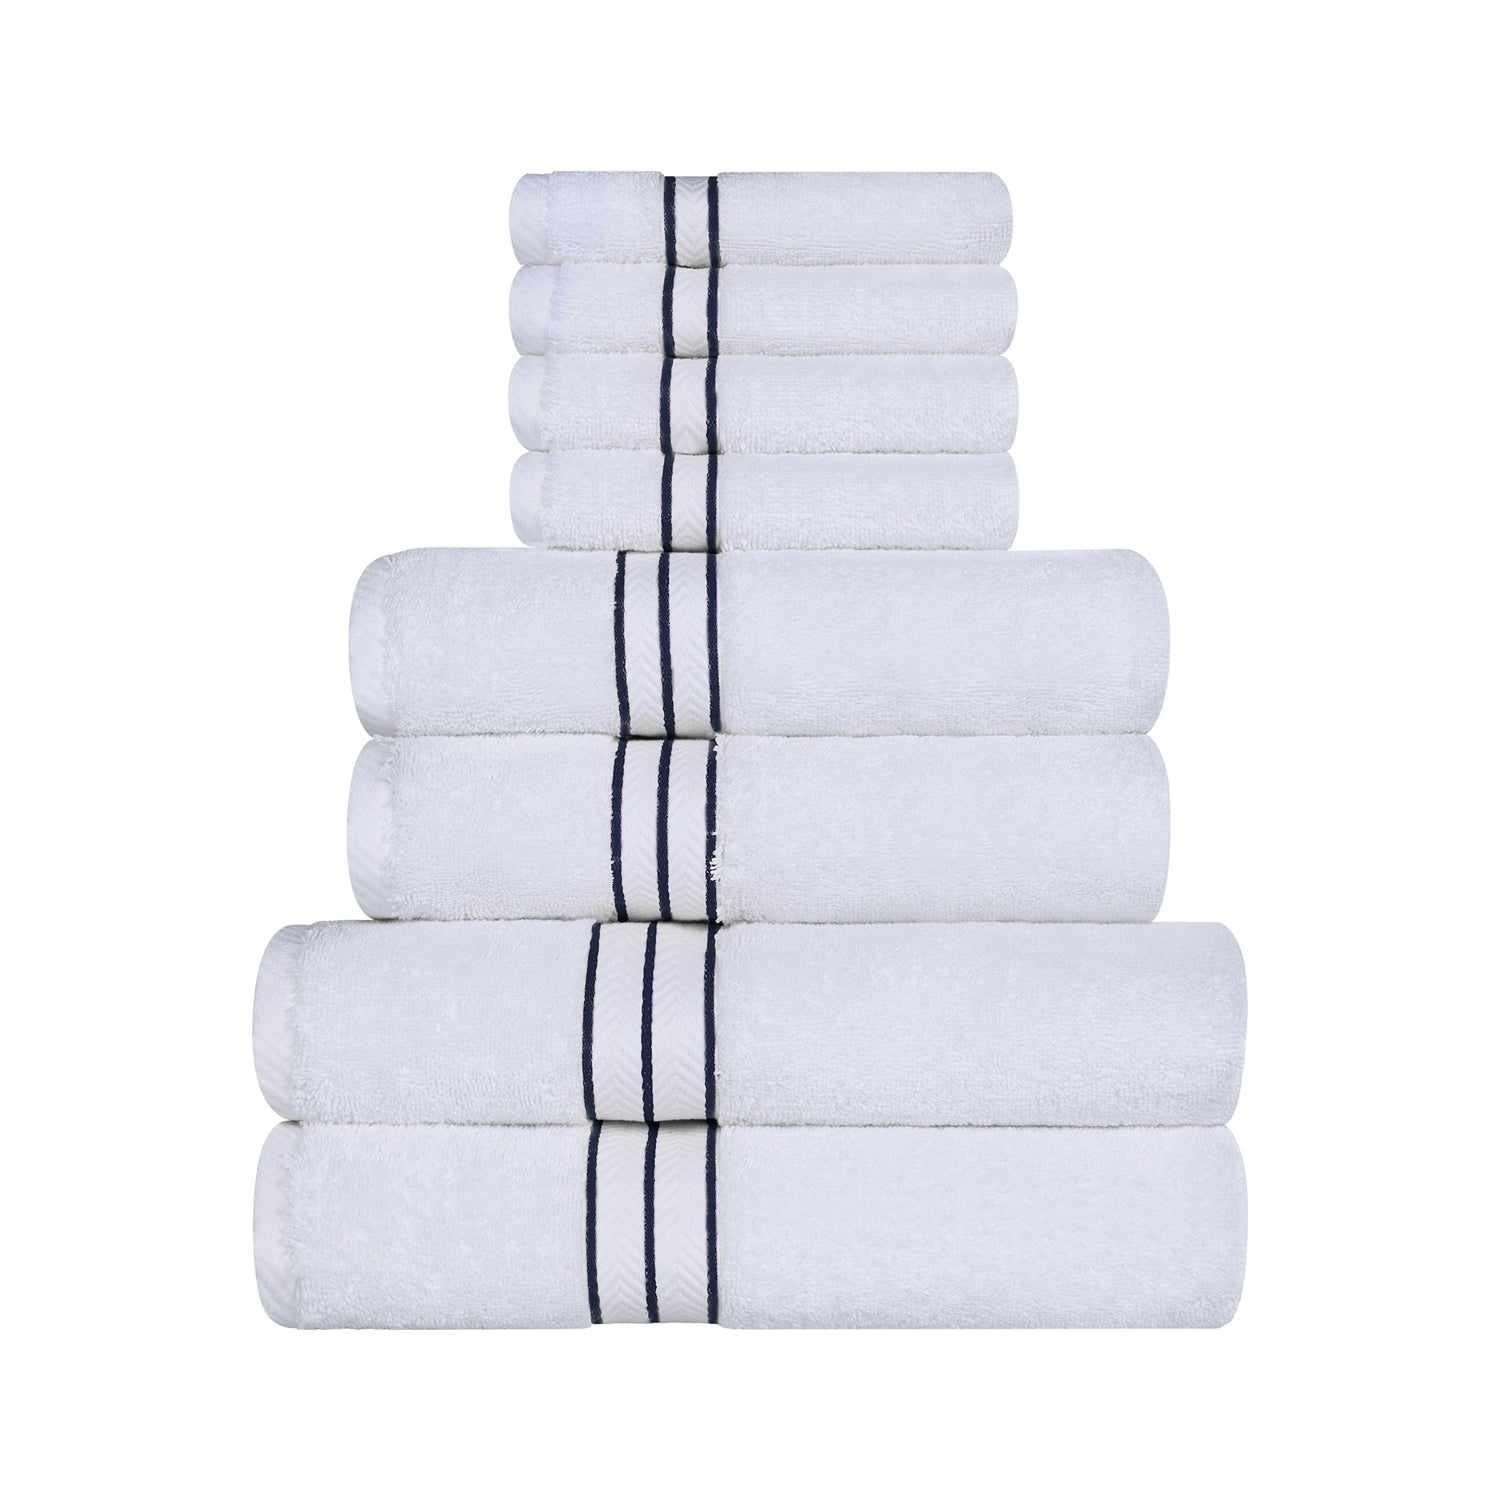  Traditional Organic Wave 650 GSM 8- Pieces Towel Set - White-Navy Blue